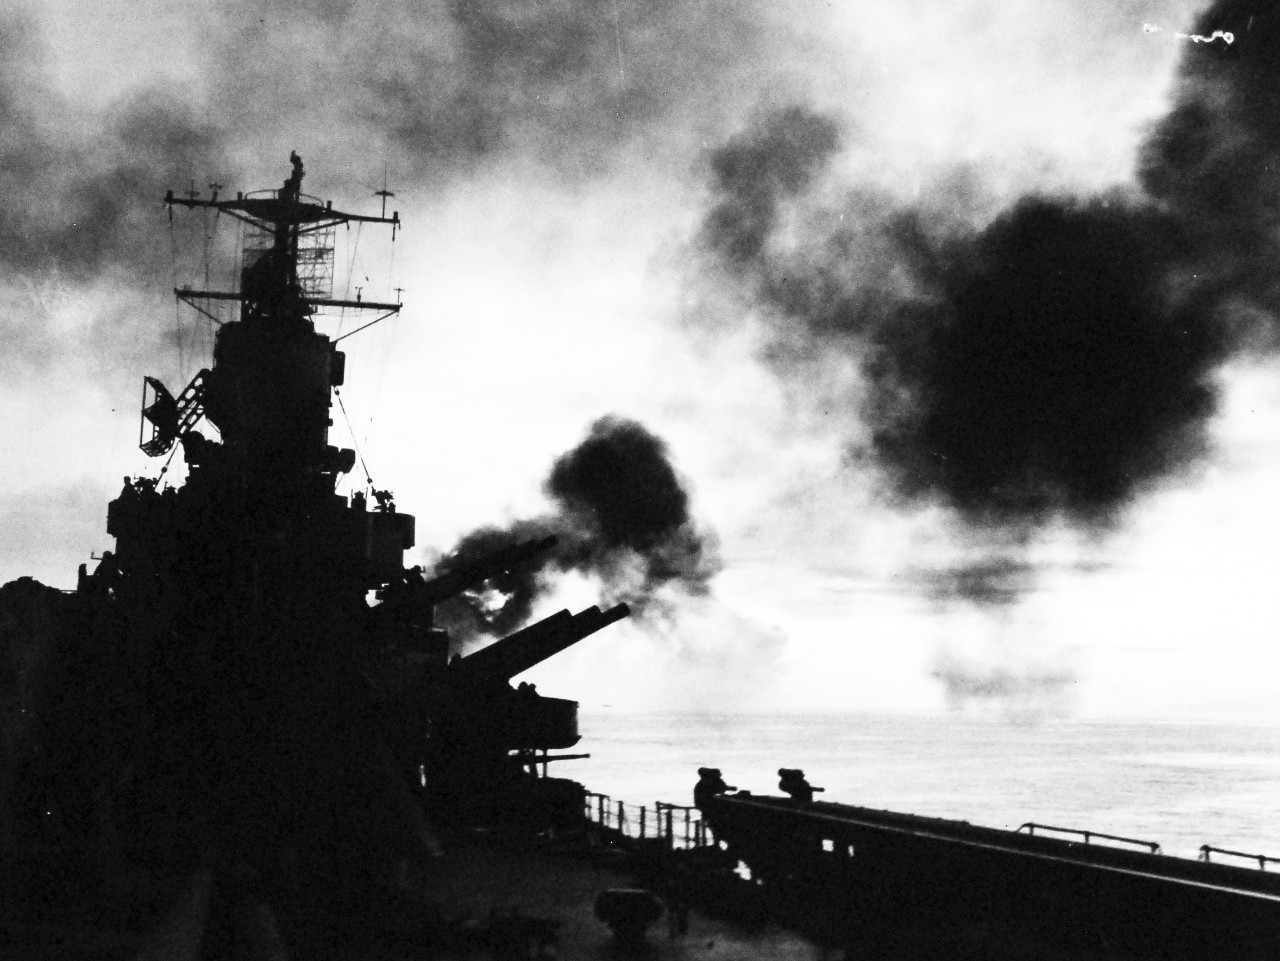 <p>80-G-57445: Battle of Cape Gloucester, New Britain, December 1943-January 1944. Bombardment of Cape Gloucester, New Britain, by USS Phoenix (CL-46) and other ships of the Task Force. Taken by USS Nashville (CL-43), December 24-26 1943.&nbsp;</p>
